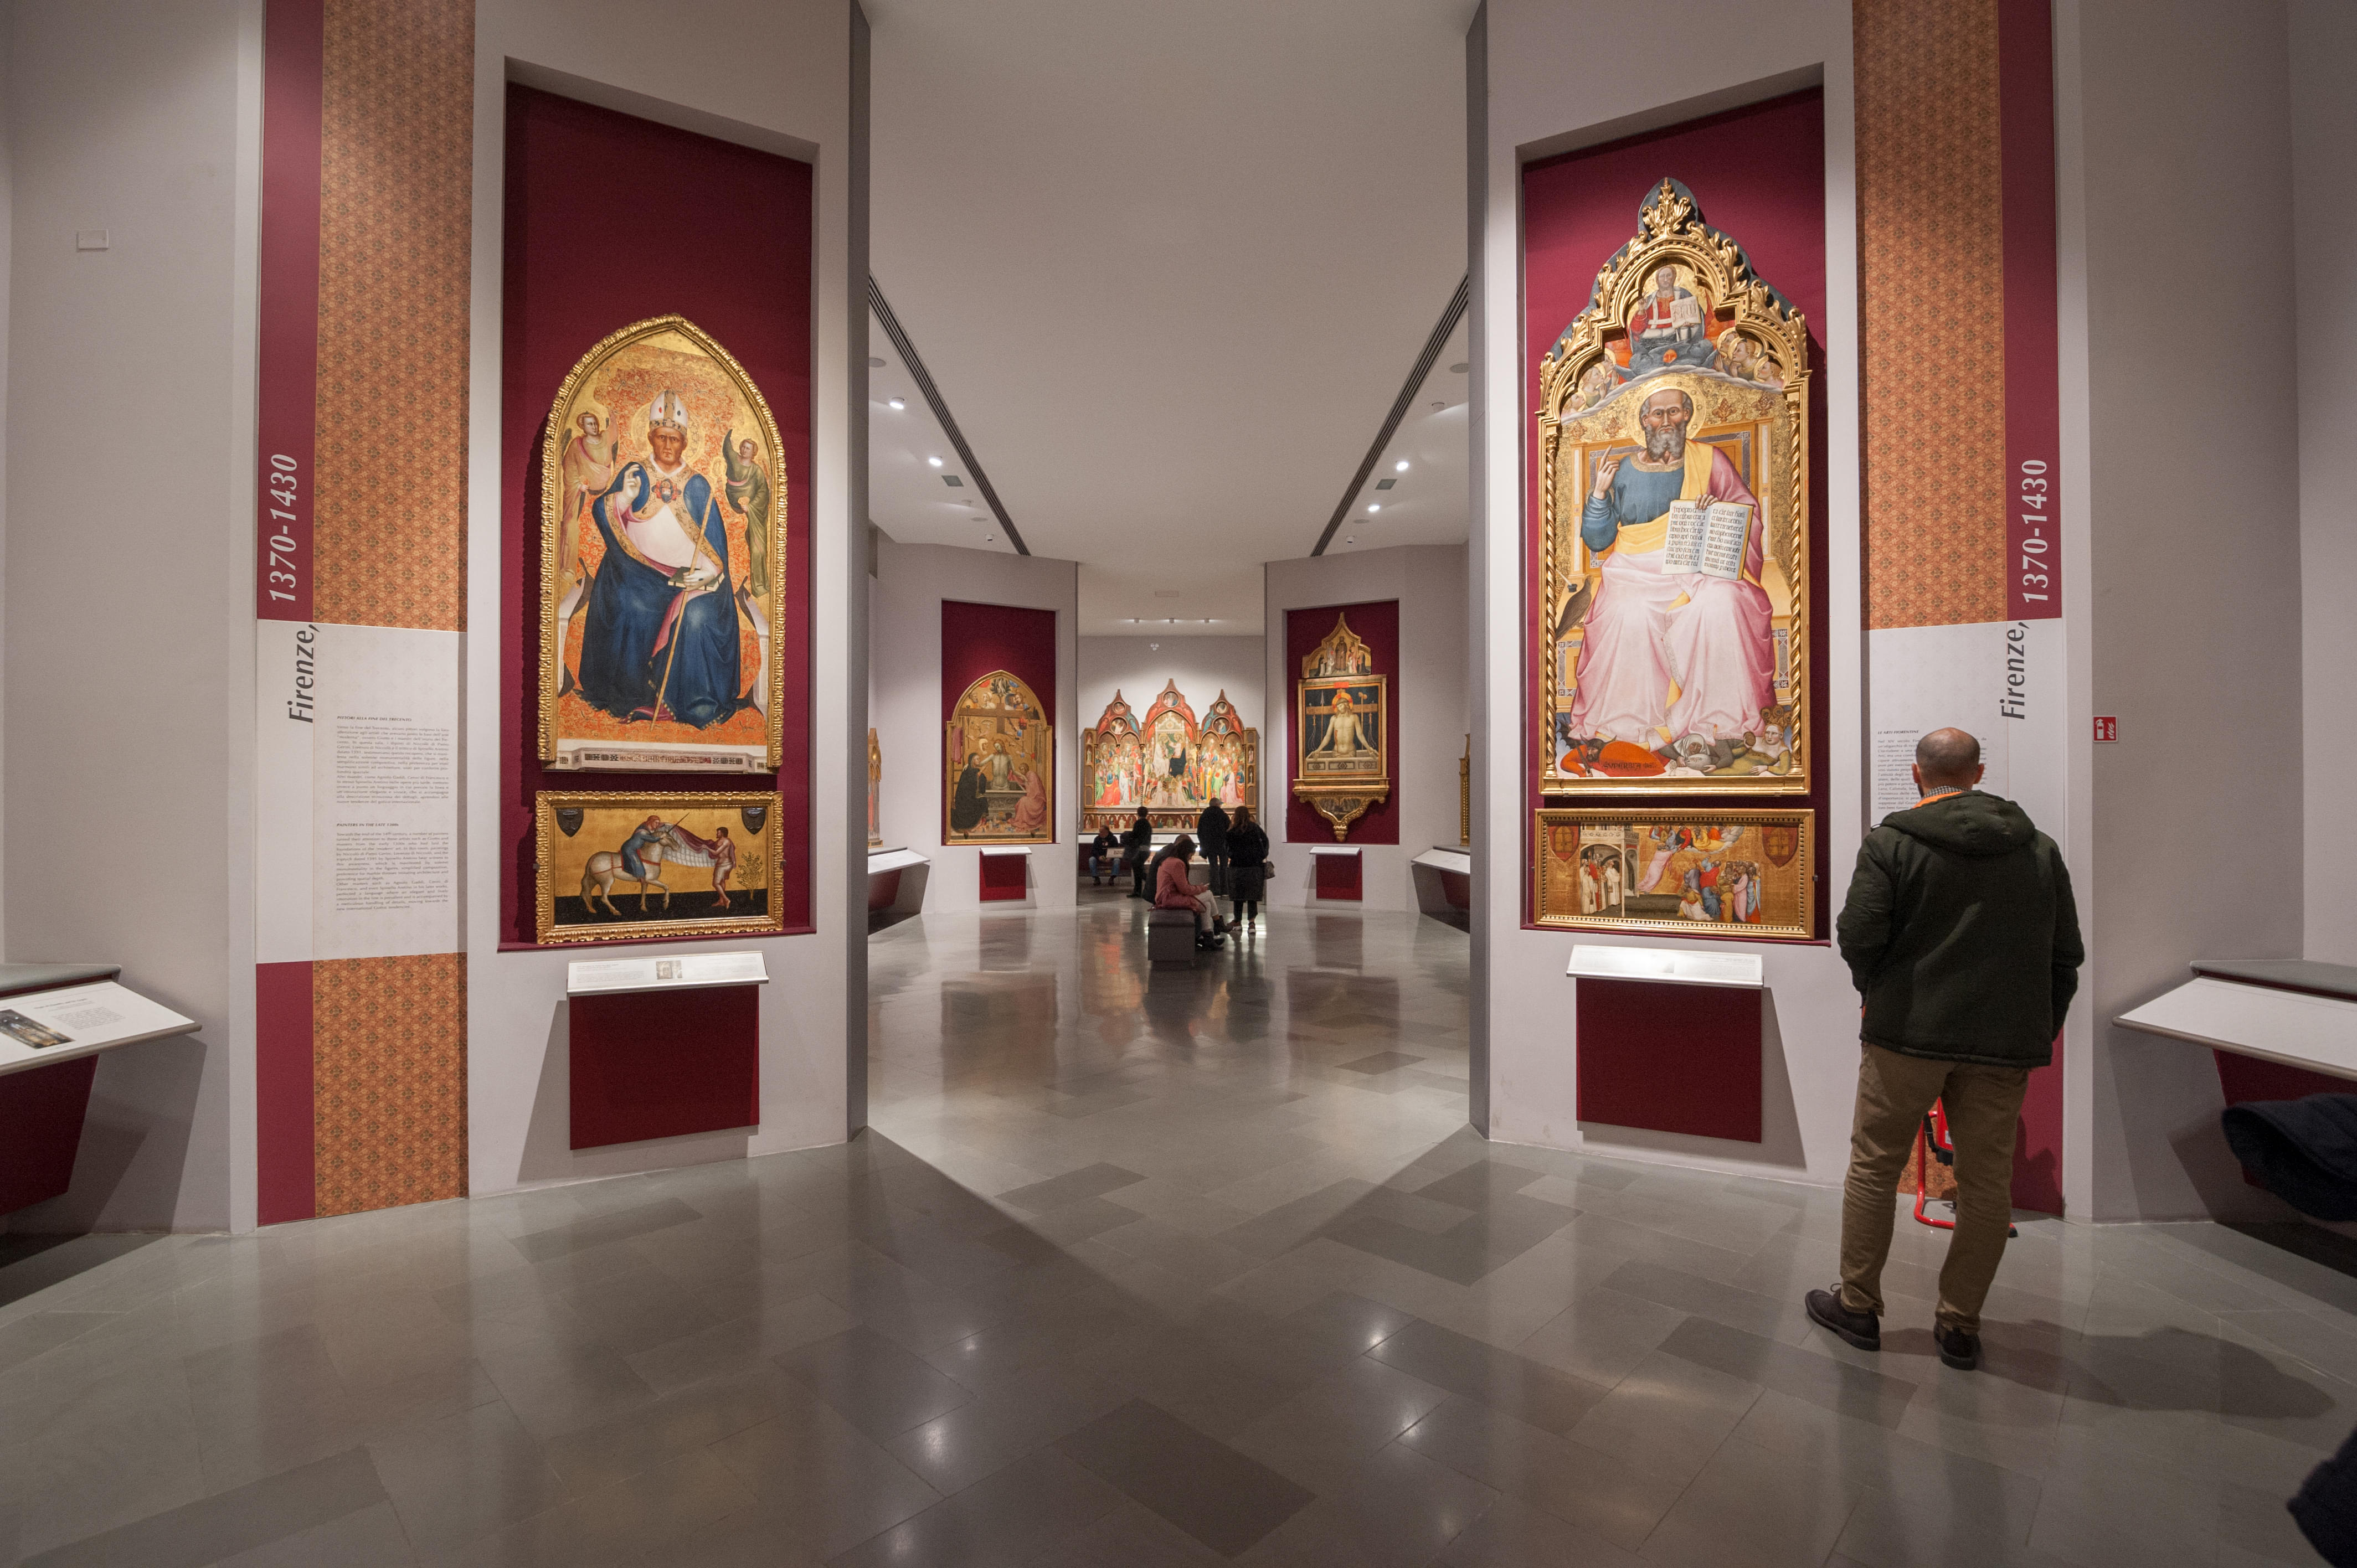 Facts about Accademia Gallery